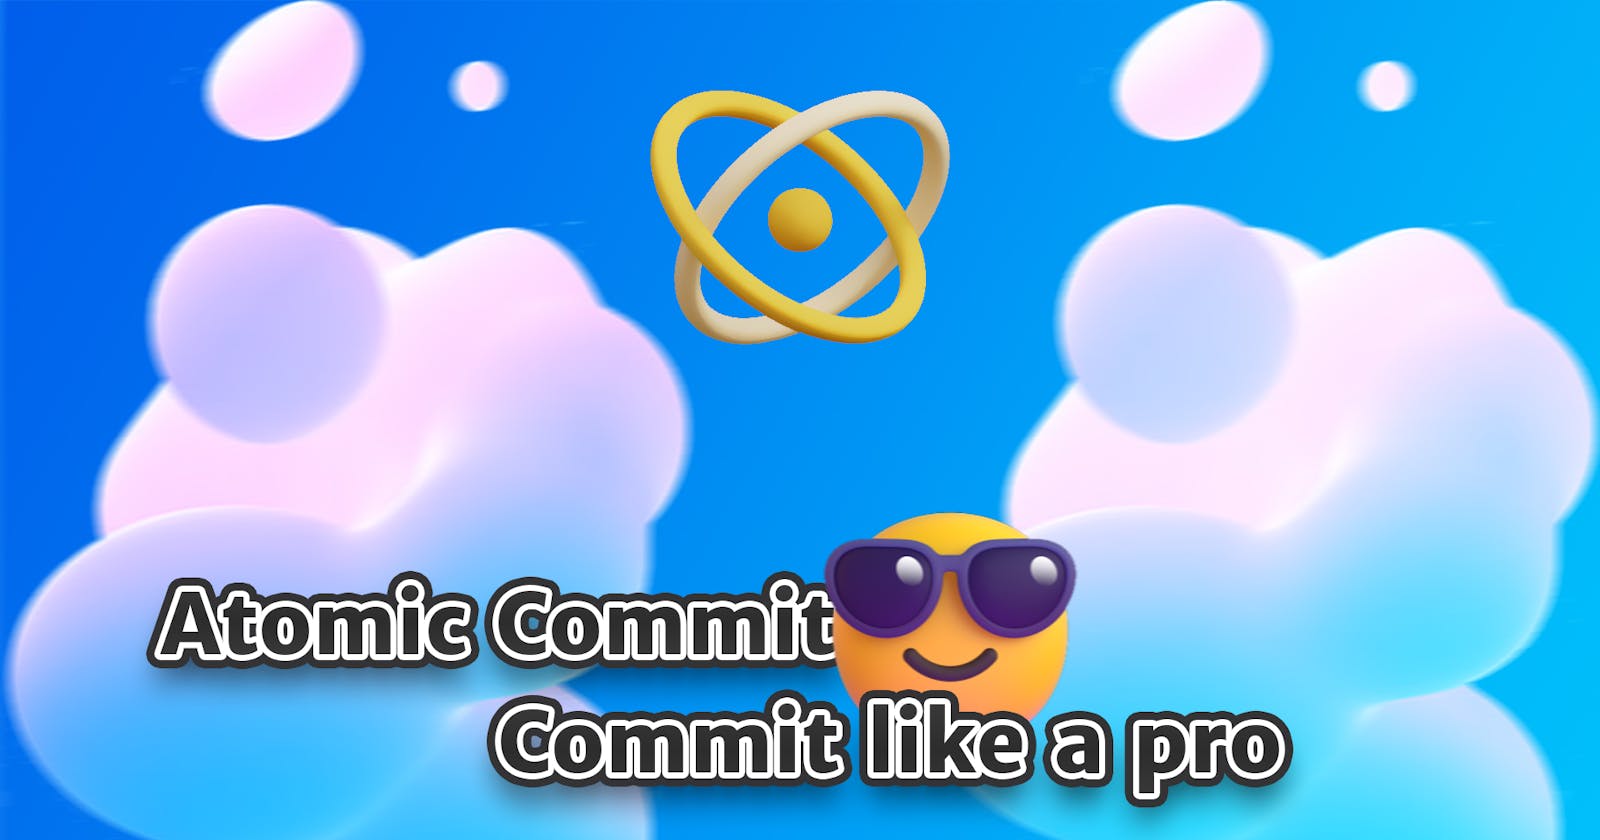 Atomic Commit, Commit like a pro